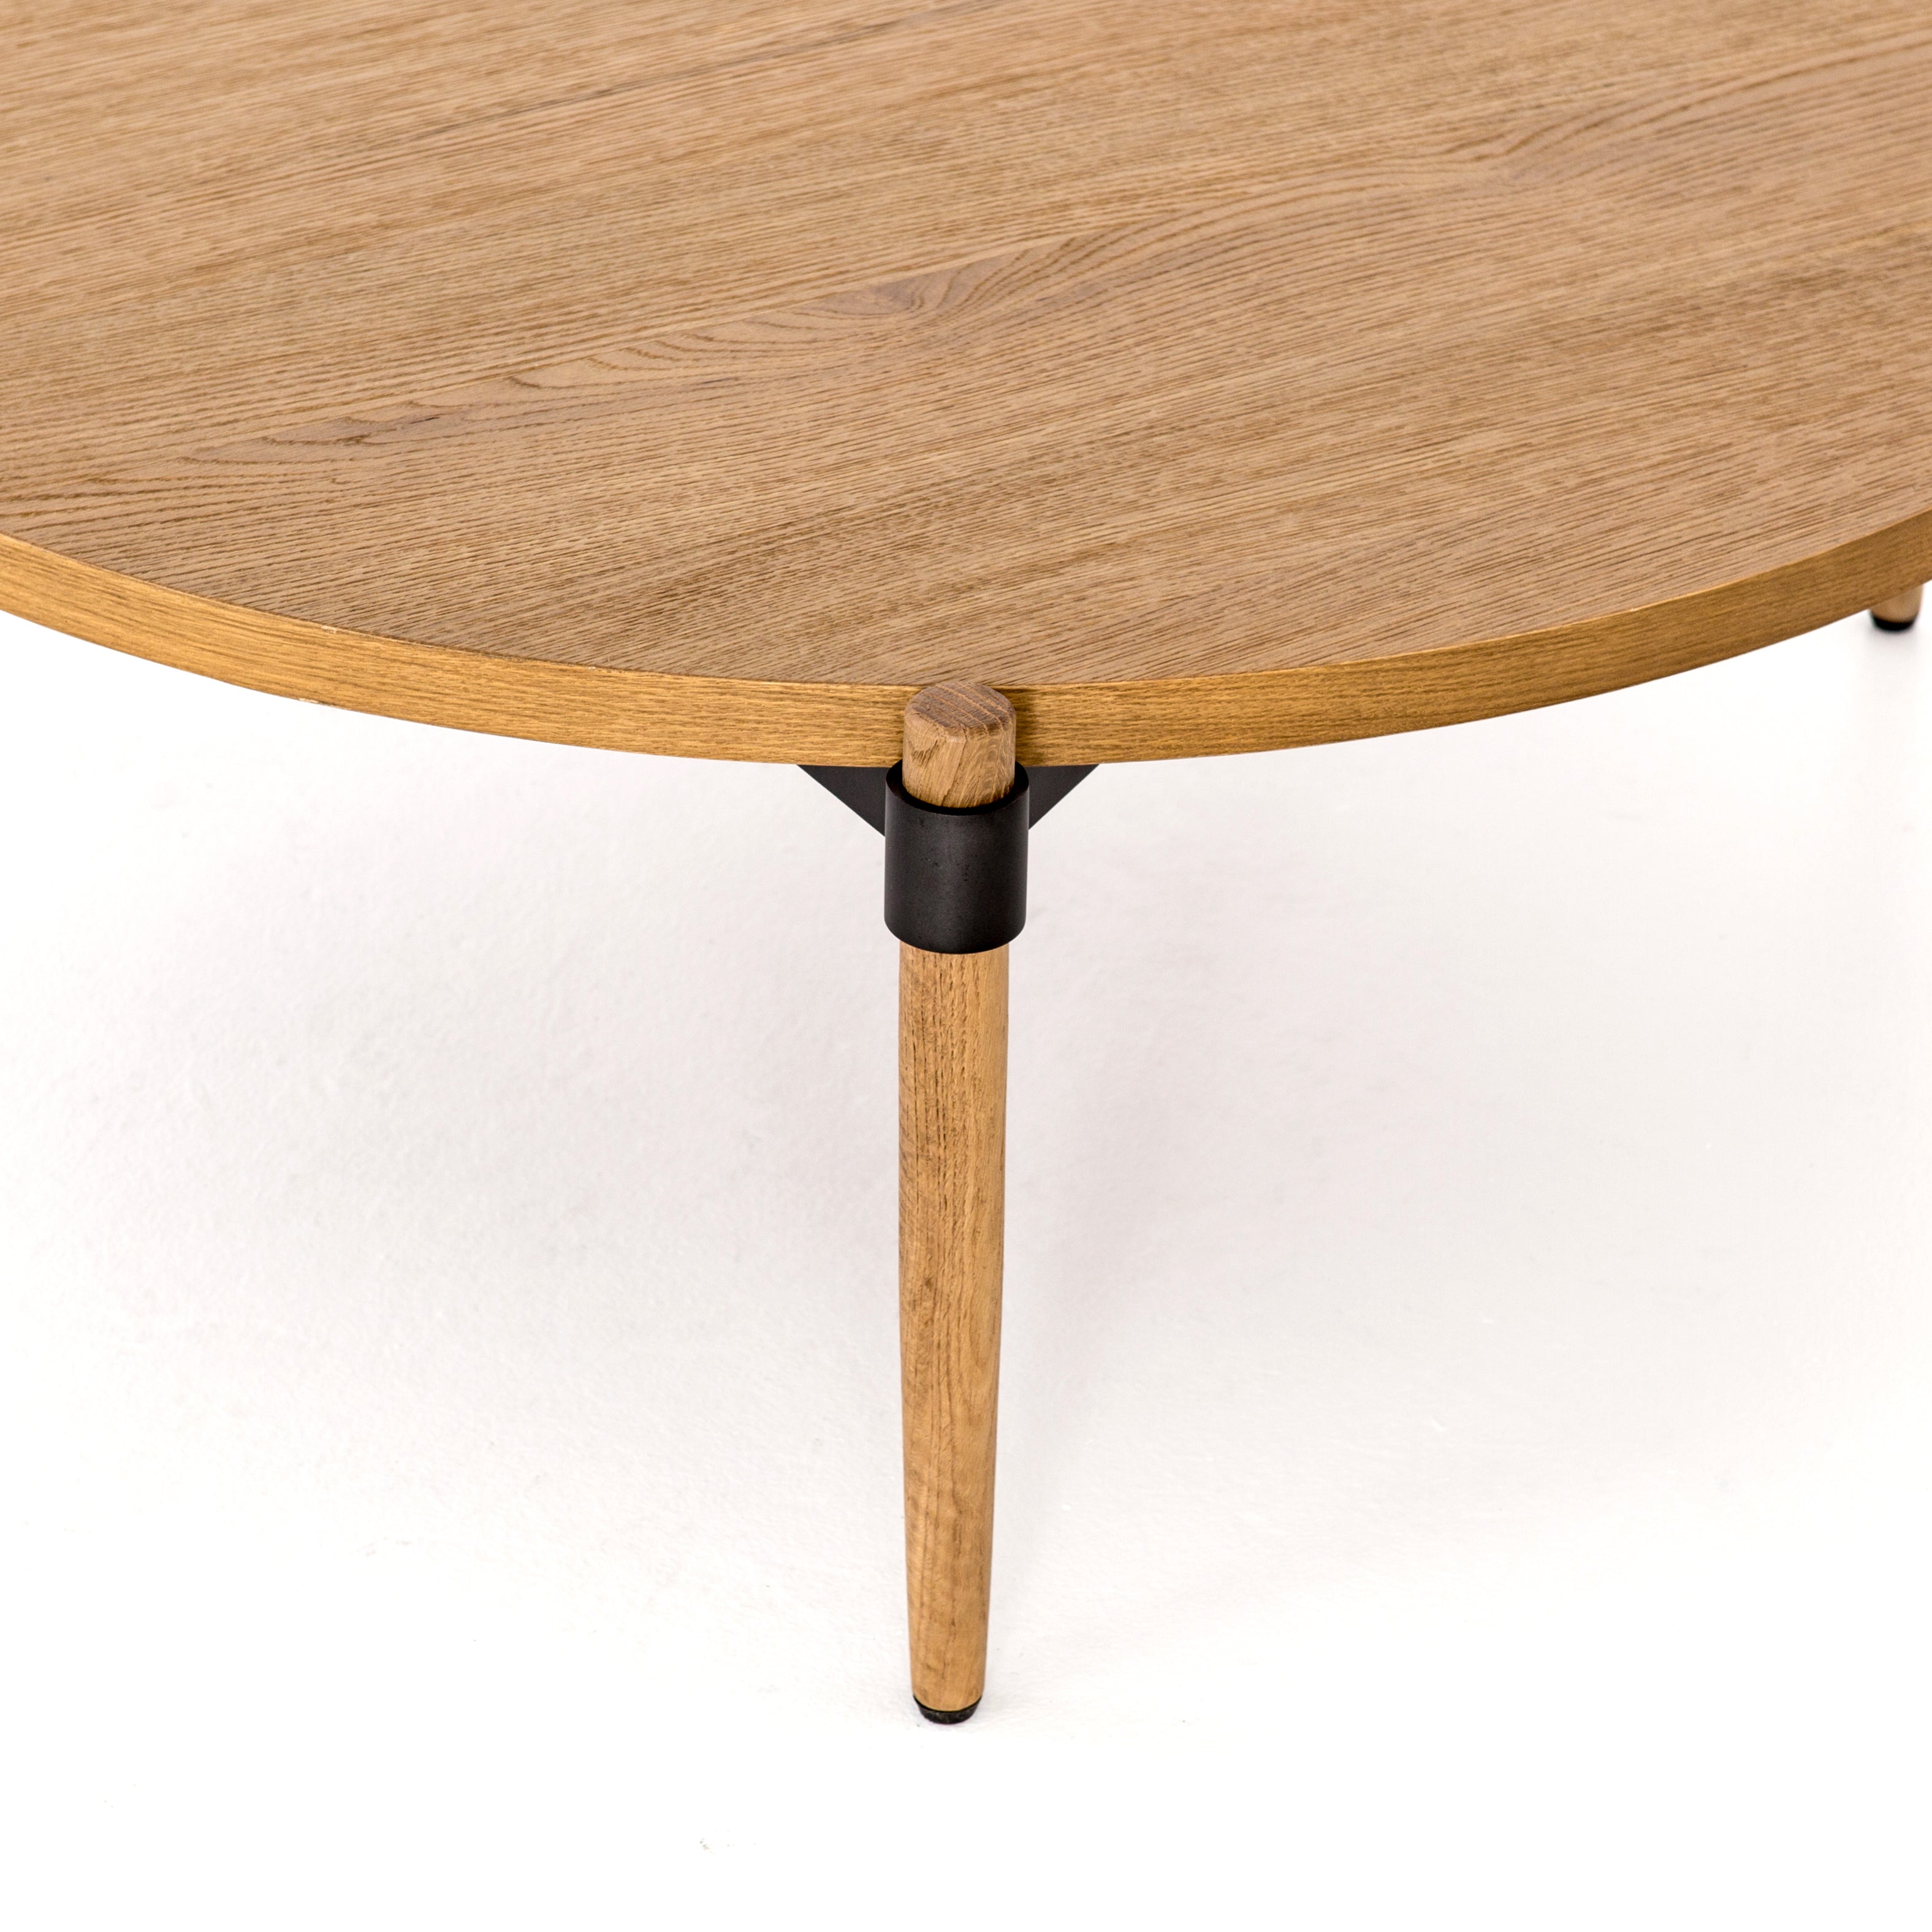 Stunning simplicity with a Danish-inspired spin. A rounded tabletop of smoked drift oak offsets a triad of slim, tapered legs. Waxed black joinery adds a fresh look of high contrast. Pair with matching cocktail table for a nested, layered look.  Overall Dimensions: 43"w x 43"d x 14.75"h   Colors: Waxed Black, Smoked Drift Oak Materials: Iron, Oak